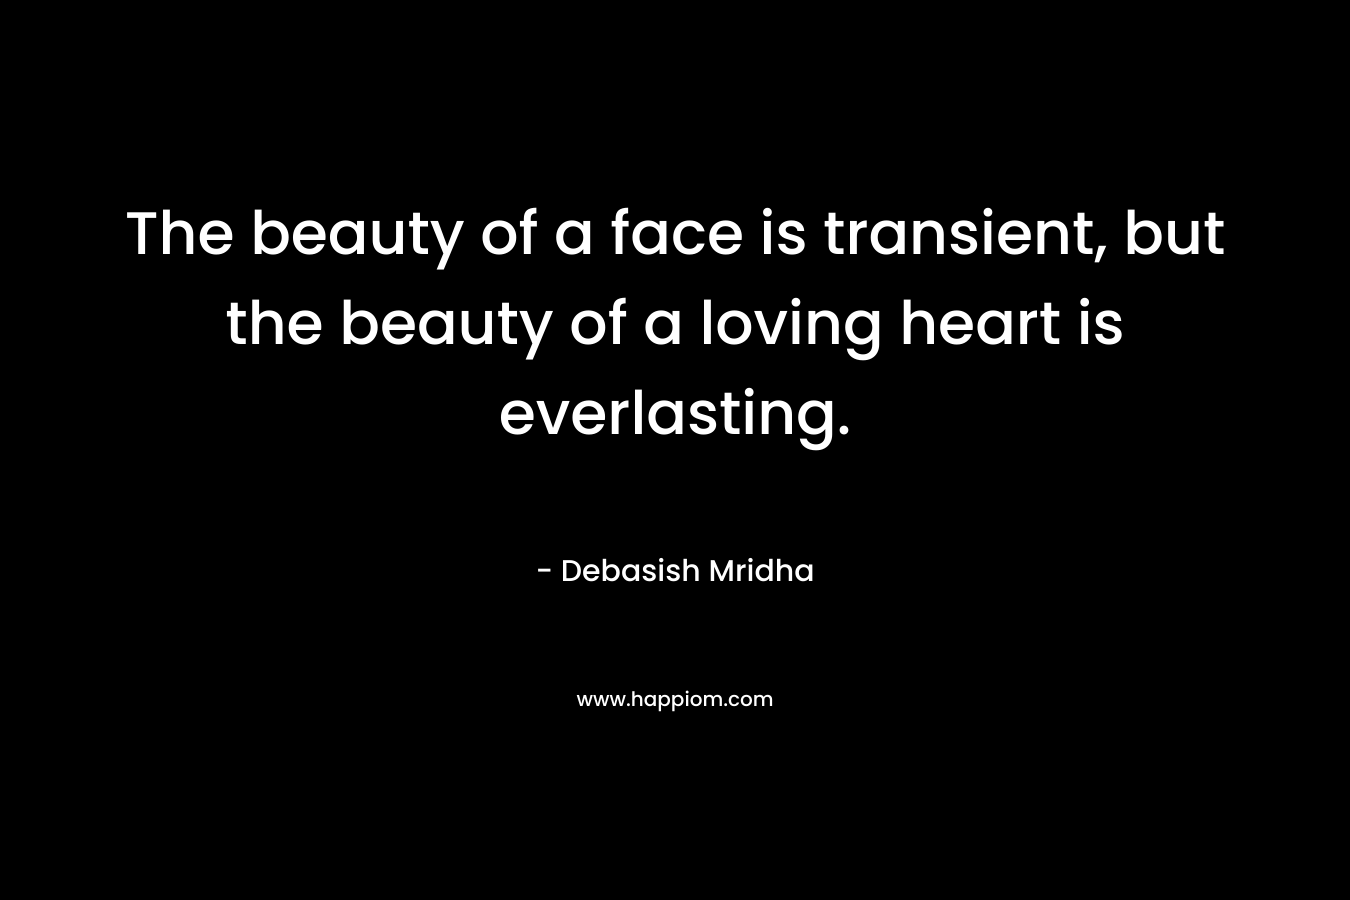 The beauty of a face is transient, but the beauty of a loving heart is everlasting. – Debasish Mridha